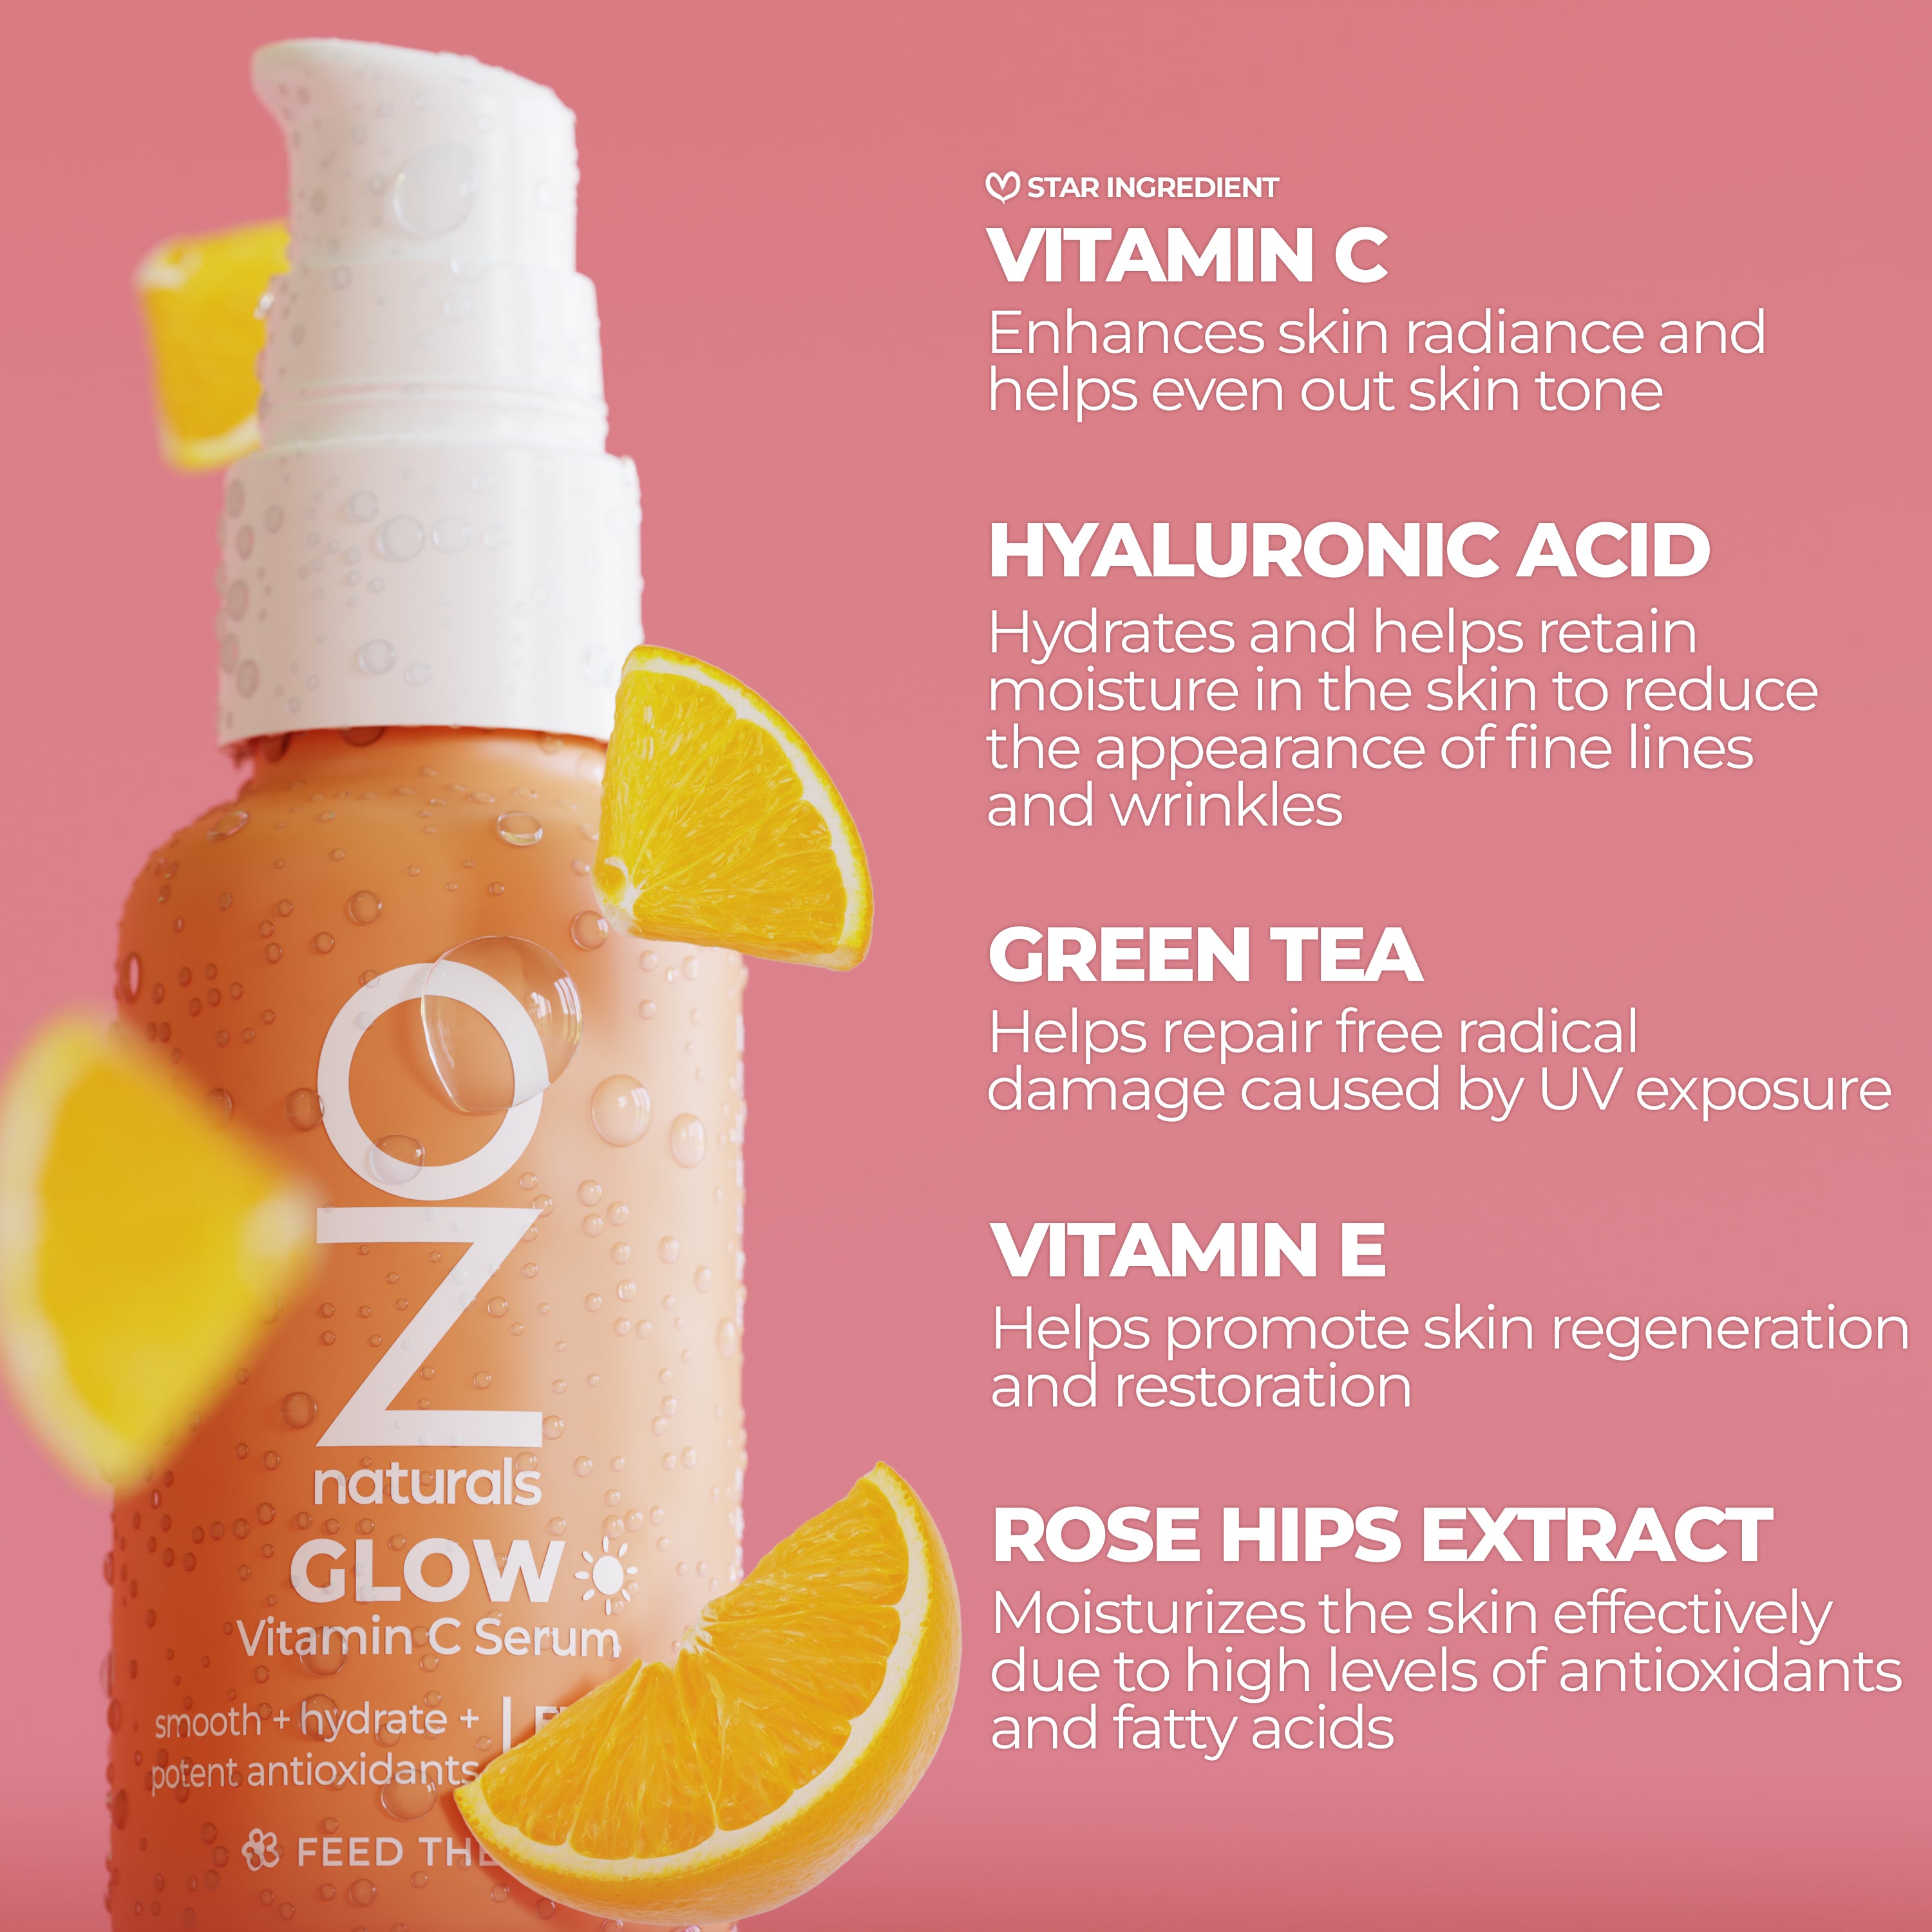 pH and Your Skin – OZNaturals